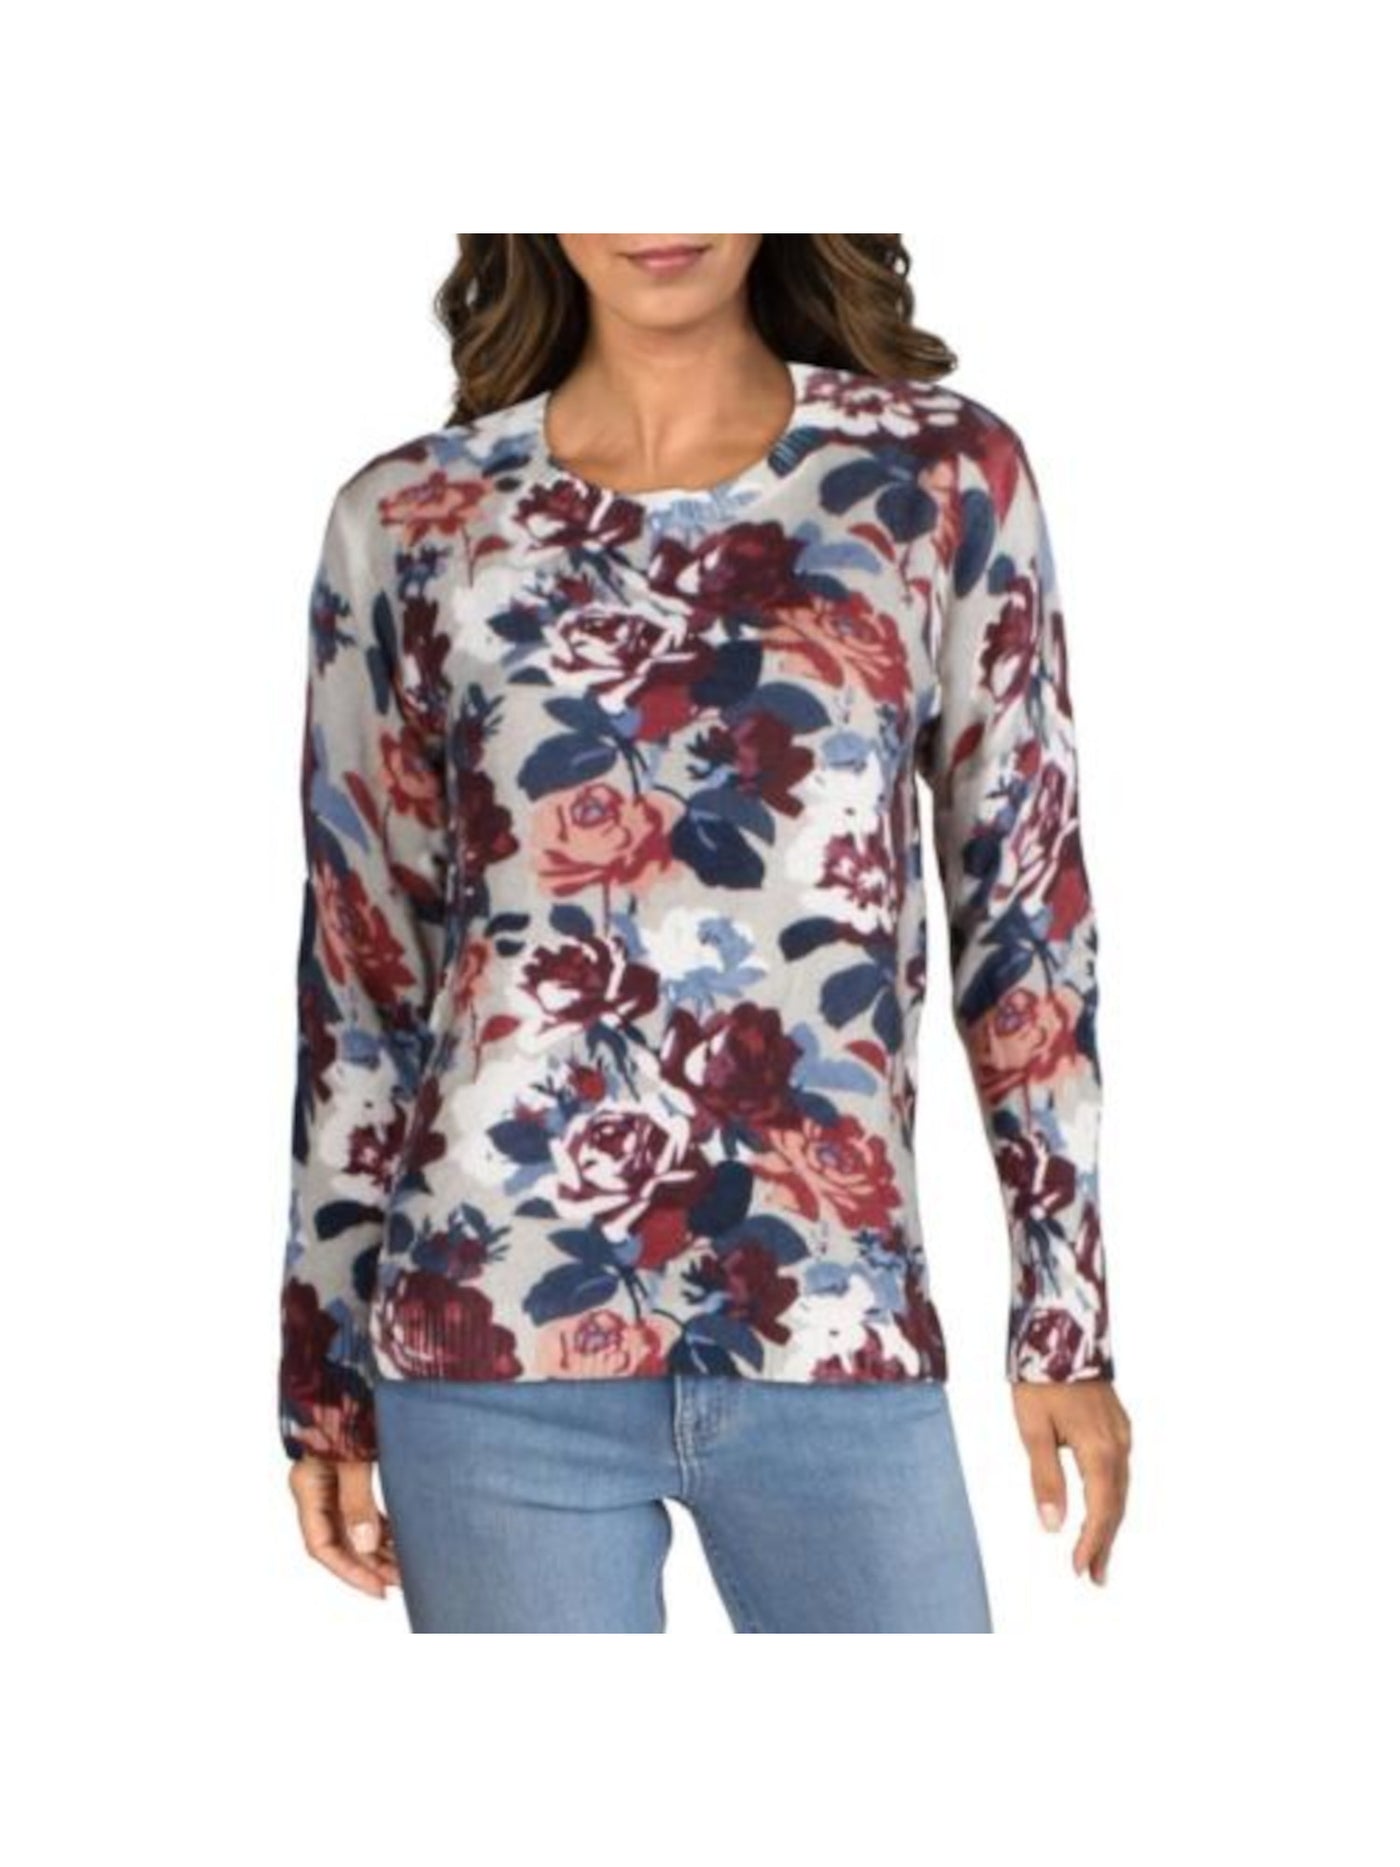 Designer Brand Womens Gray Cashmere Ribbed Floral Long Sleeve Crew Neck Sweater M